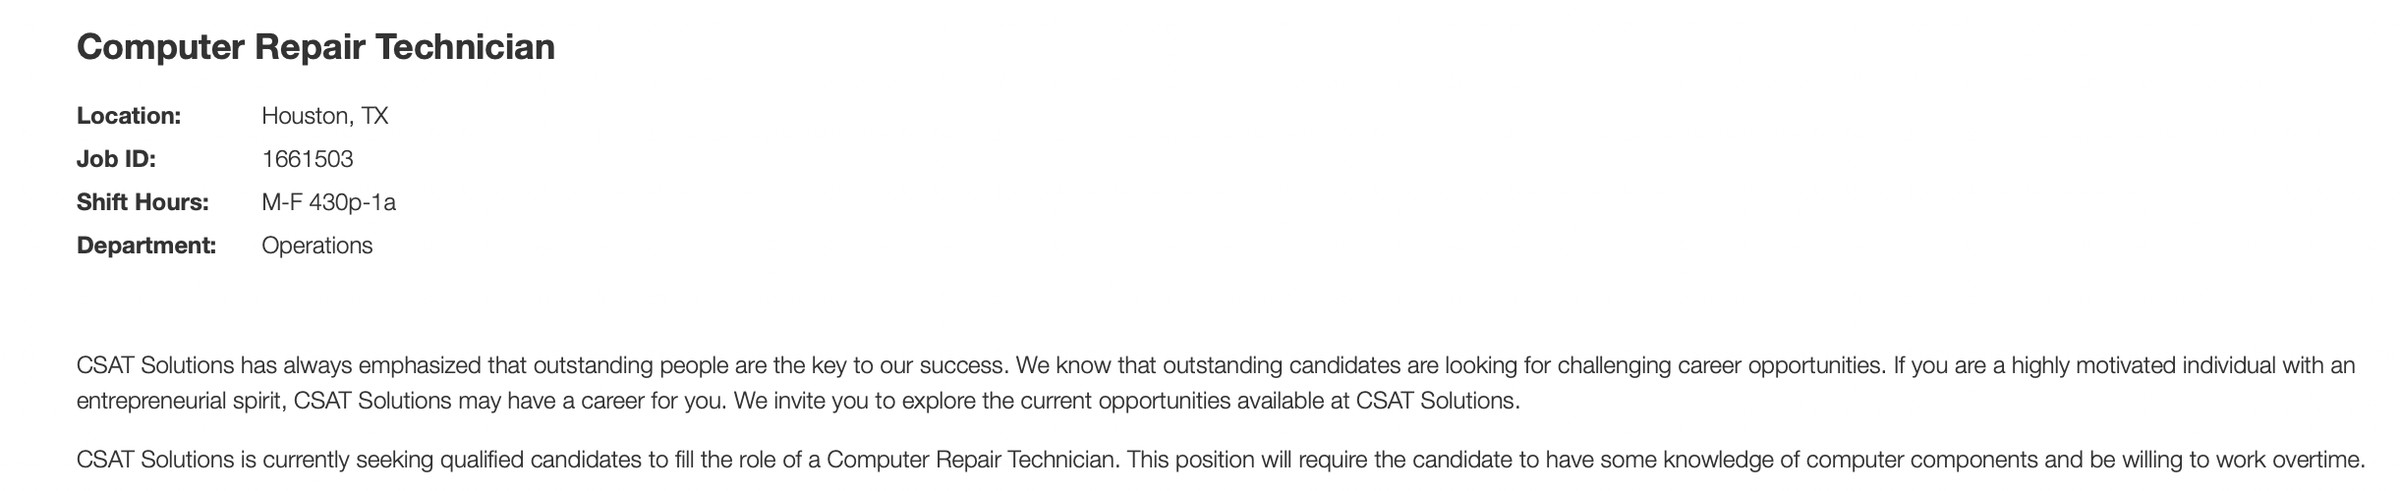 The job listing includes the line “This position will require the candidate to have some knowledge of computer components and be willing to work overtime.”